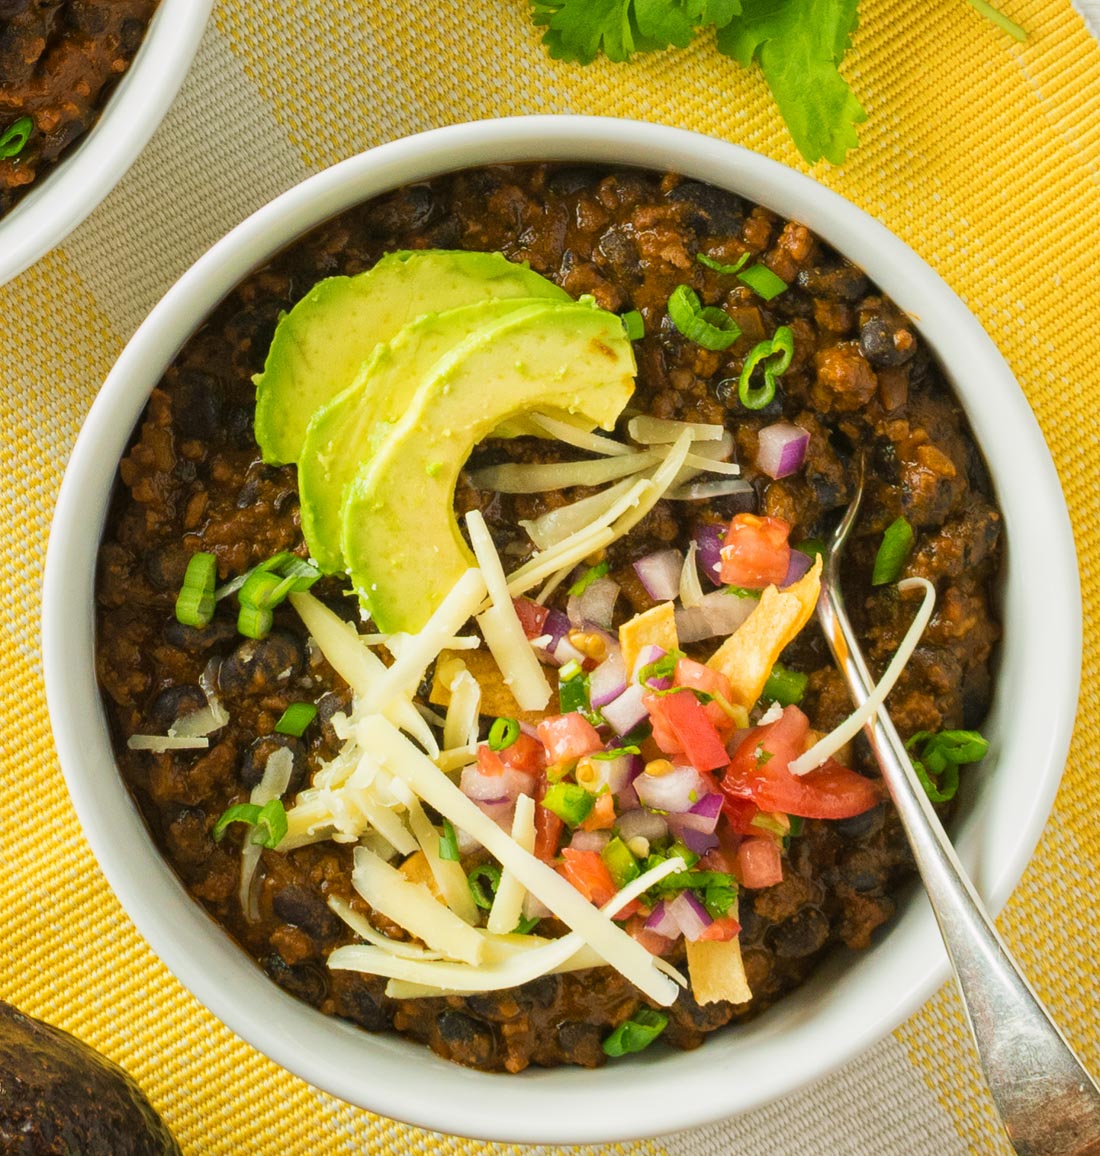 Pork, beef, new mexican red chili powder and fire roasted tomatoes all star in this black bean chili. This chili is for lovers of big flavours!